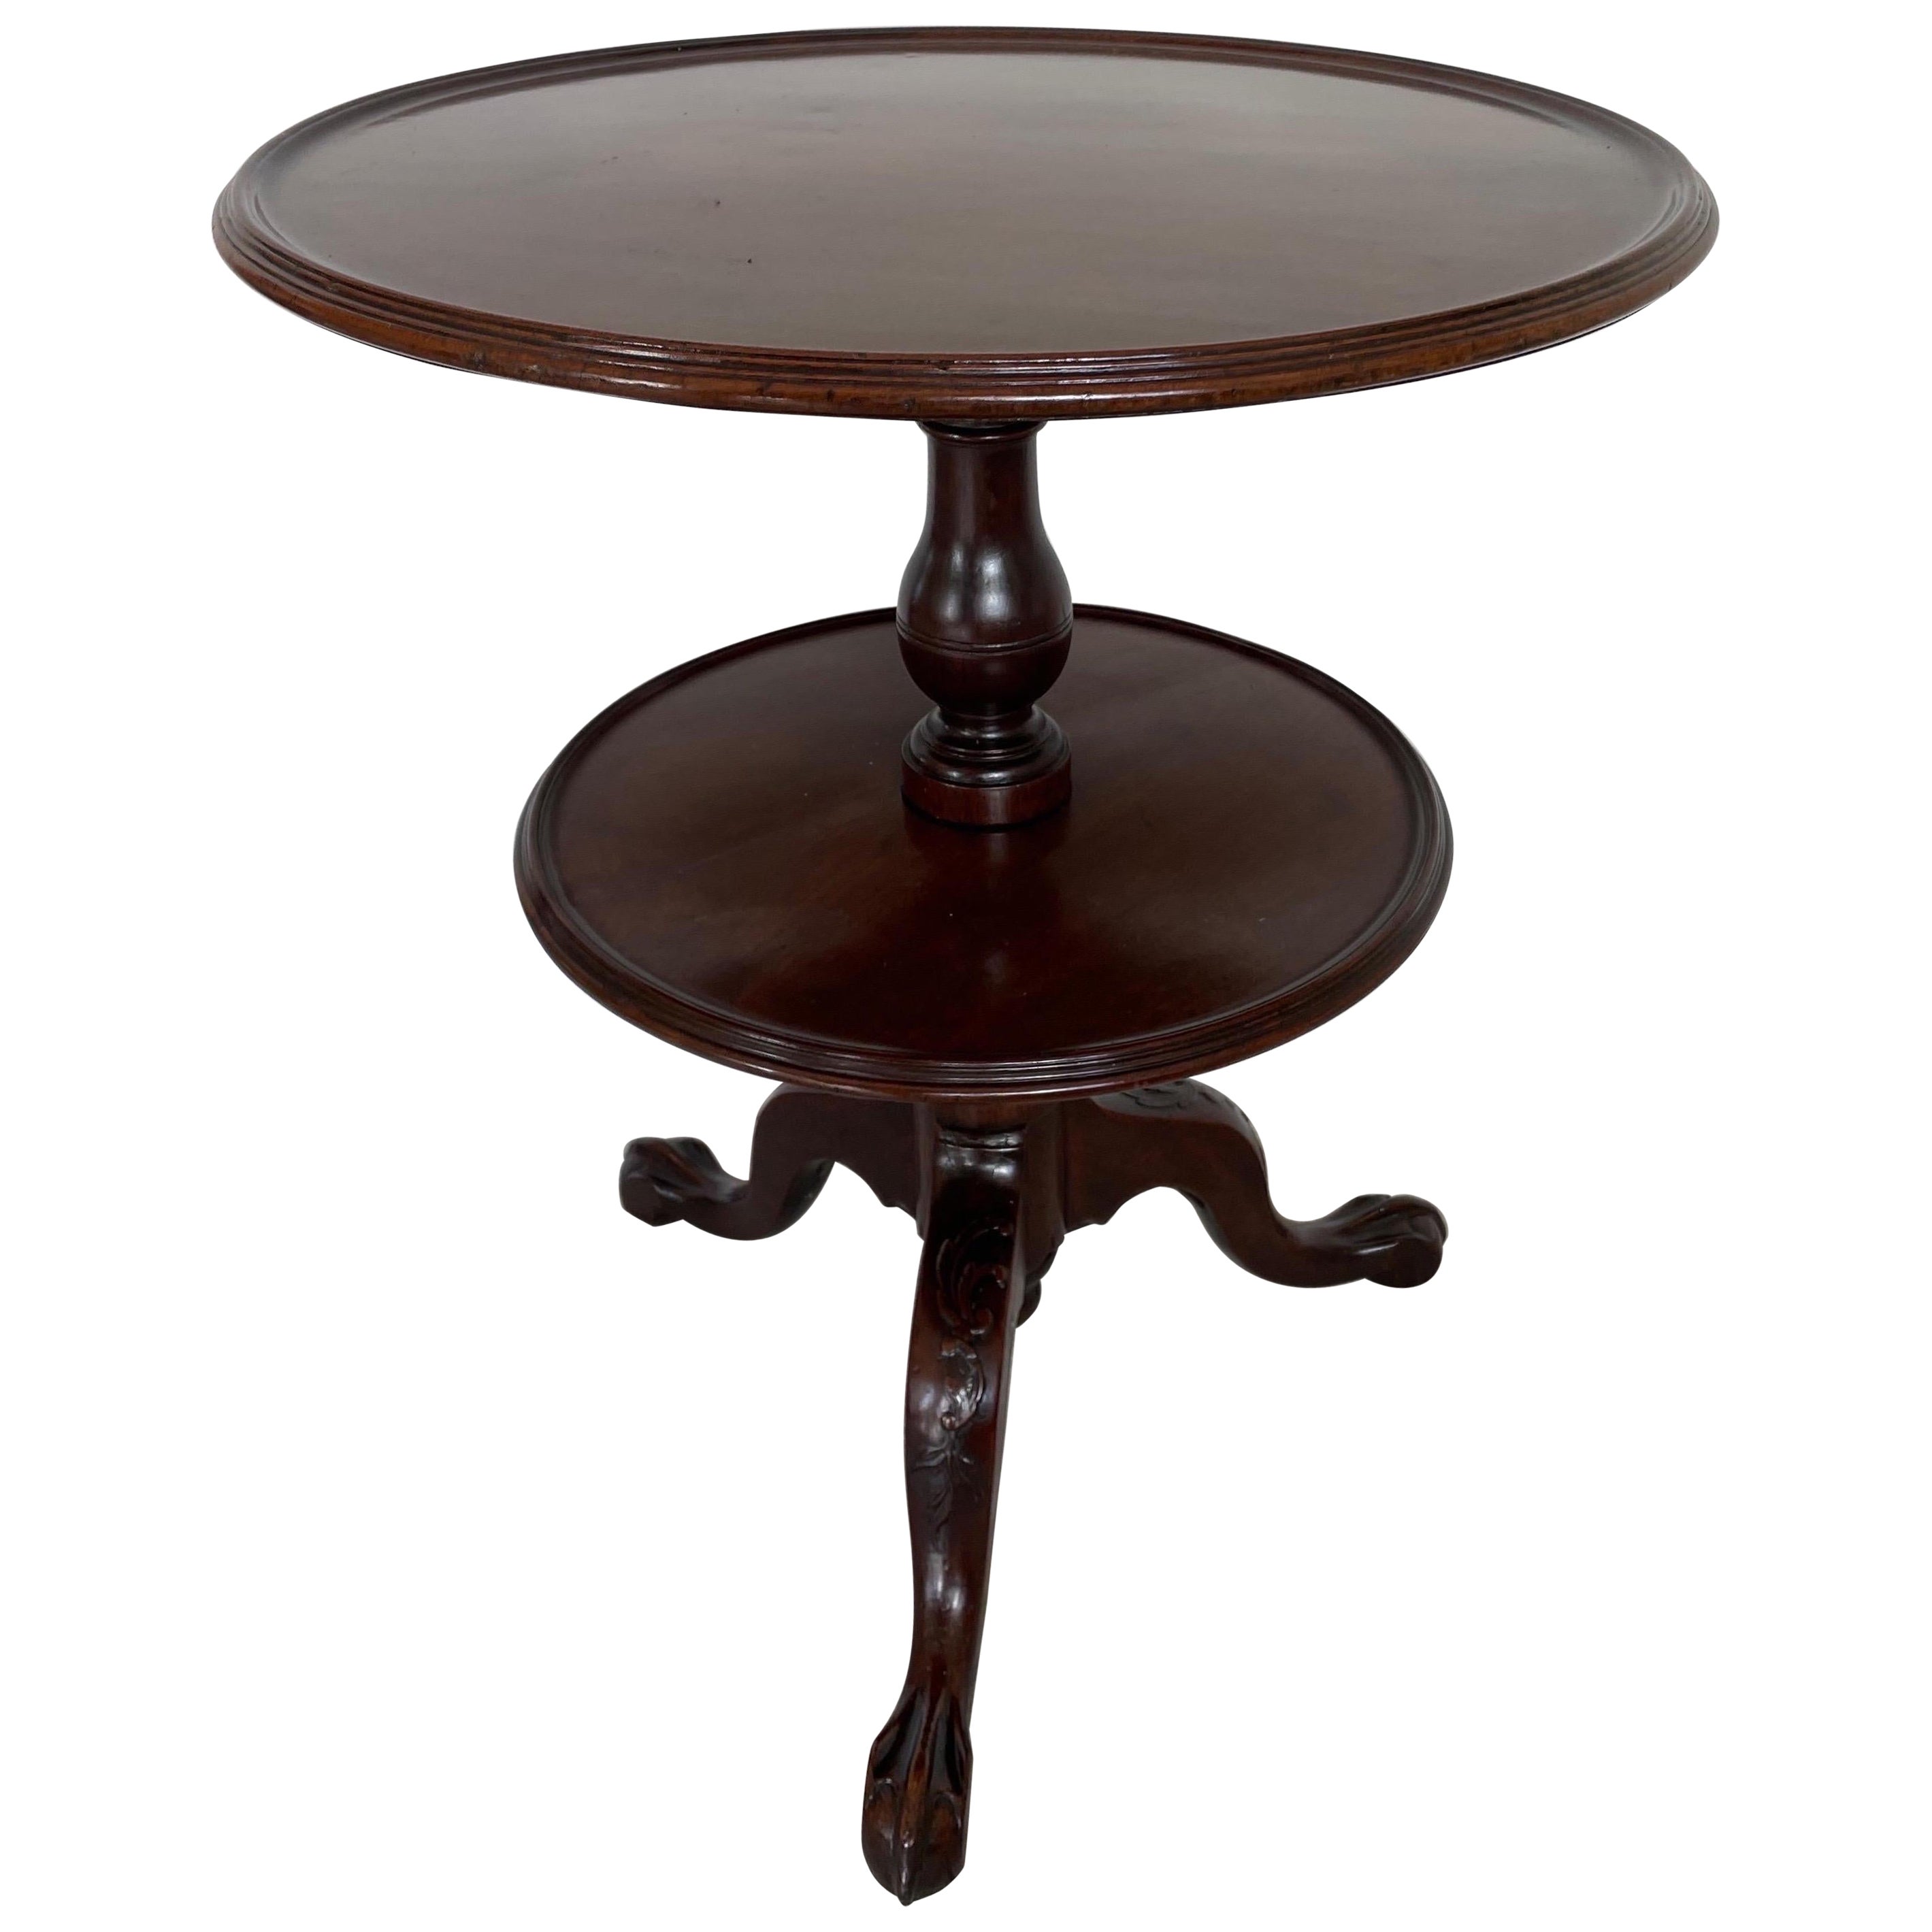 Antique Two-Tiered Lazy Susan Table